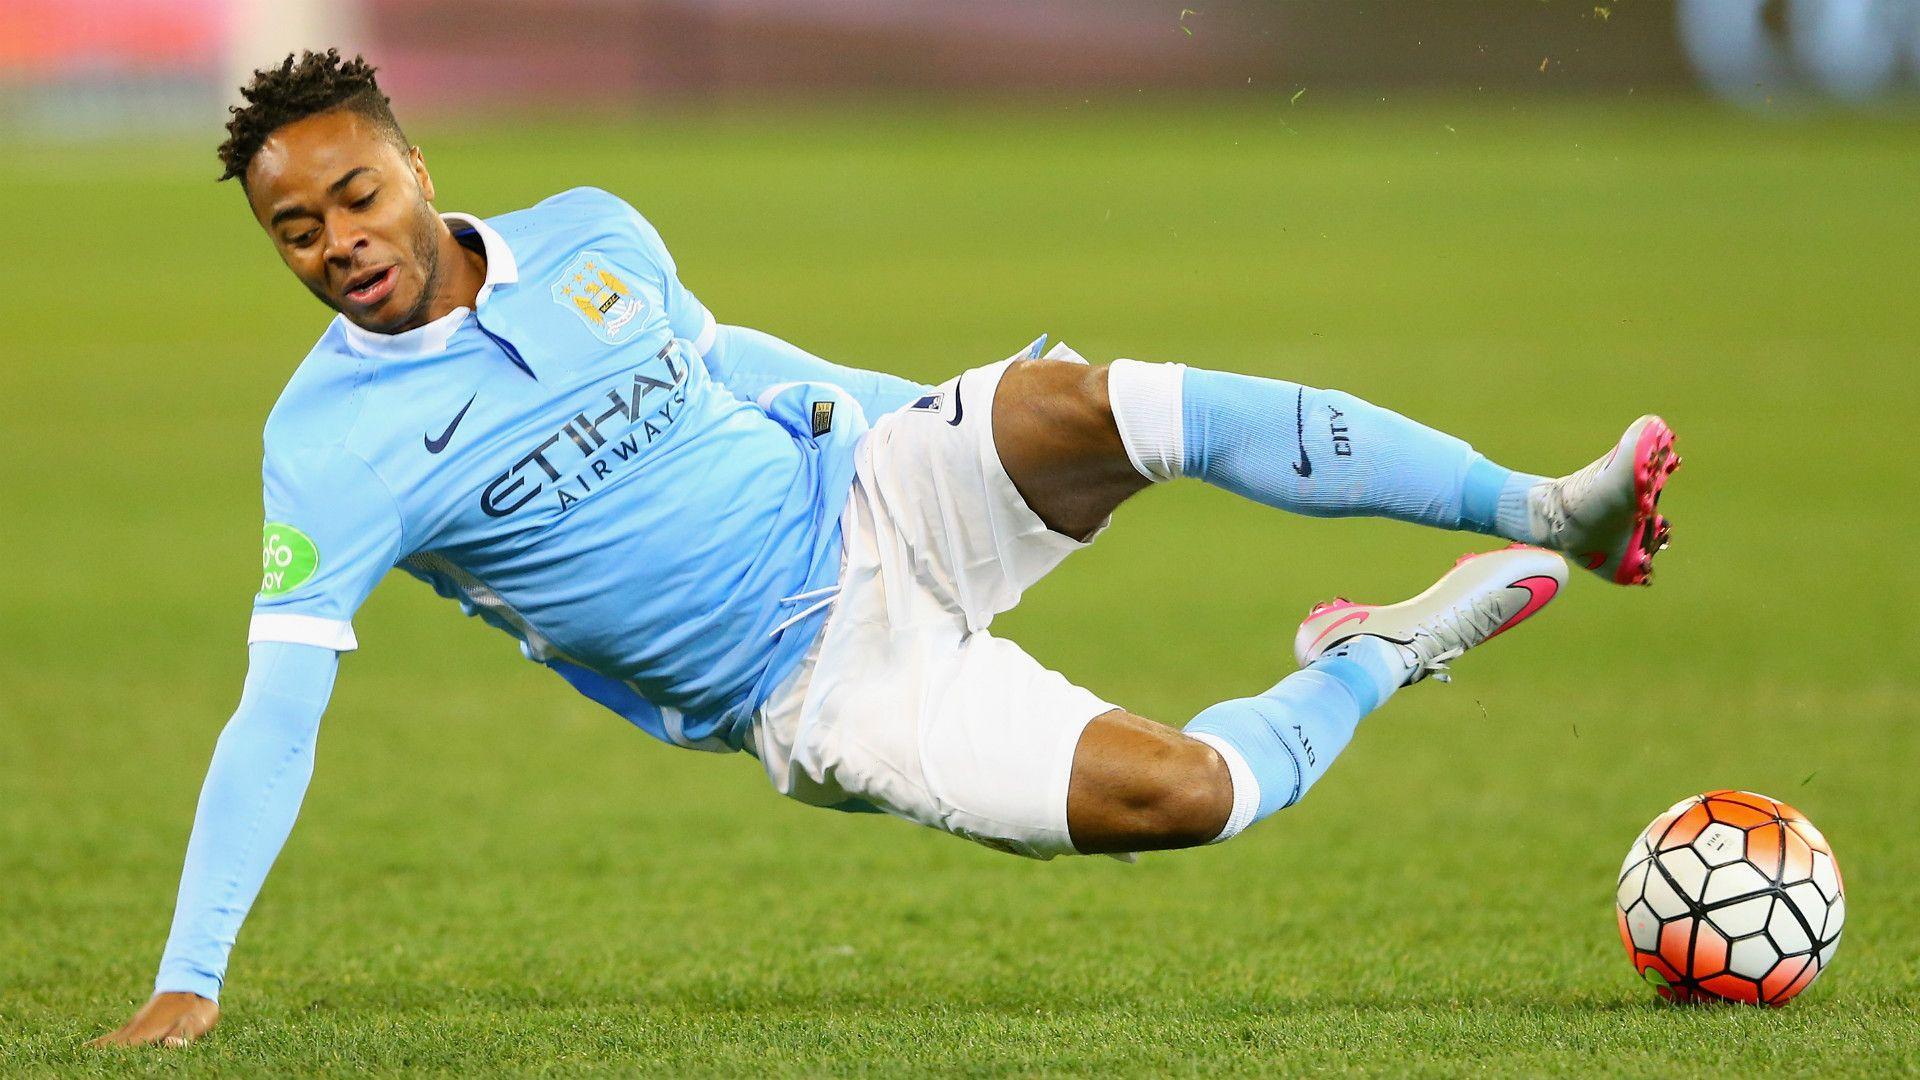 Manchester City Raheem Sterling Wallpaper: Players, Teams, Leagues